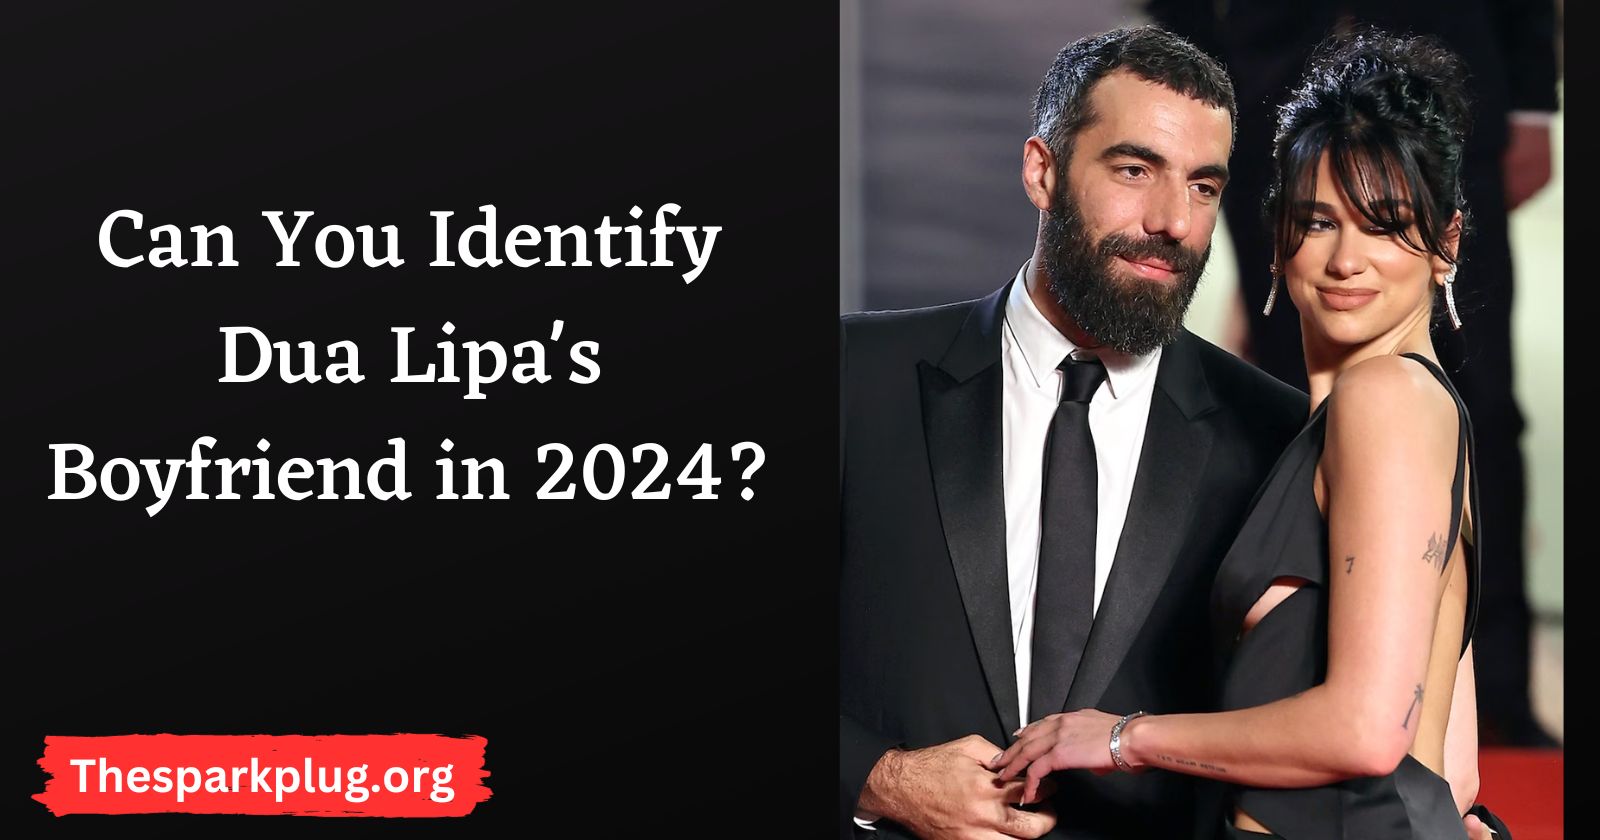 Can You Identify Dua Lipa's Boyfriend in 2024? Explore the Dating History of the Rising British Star